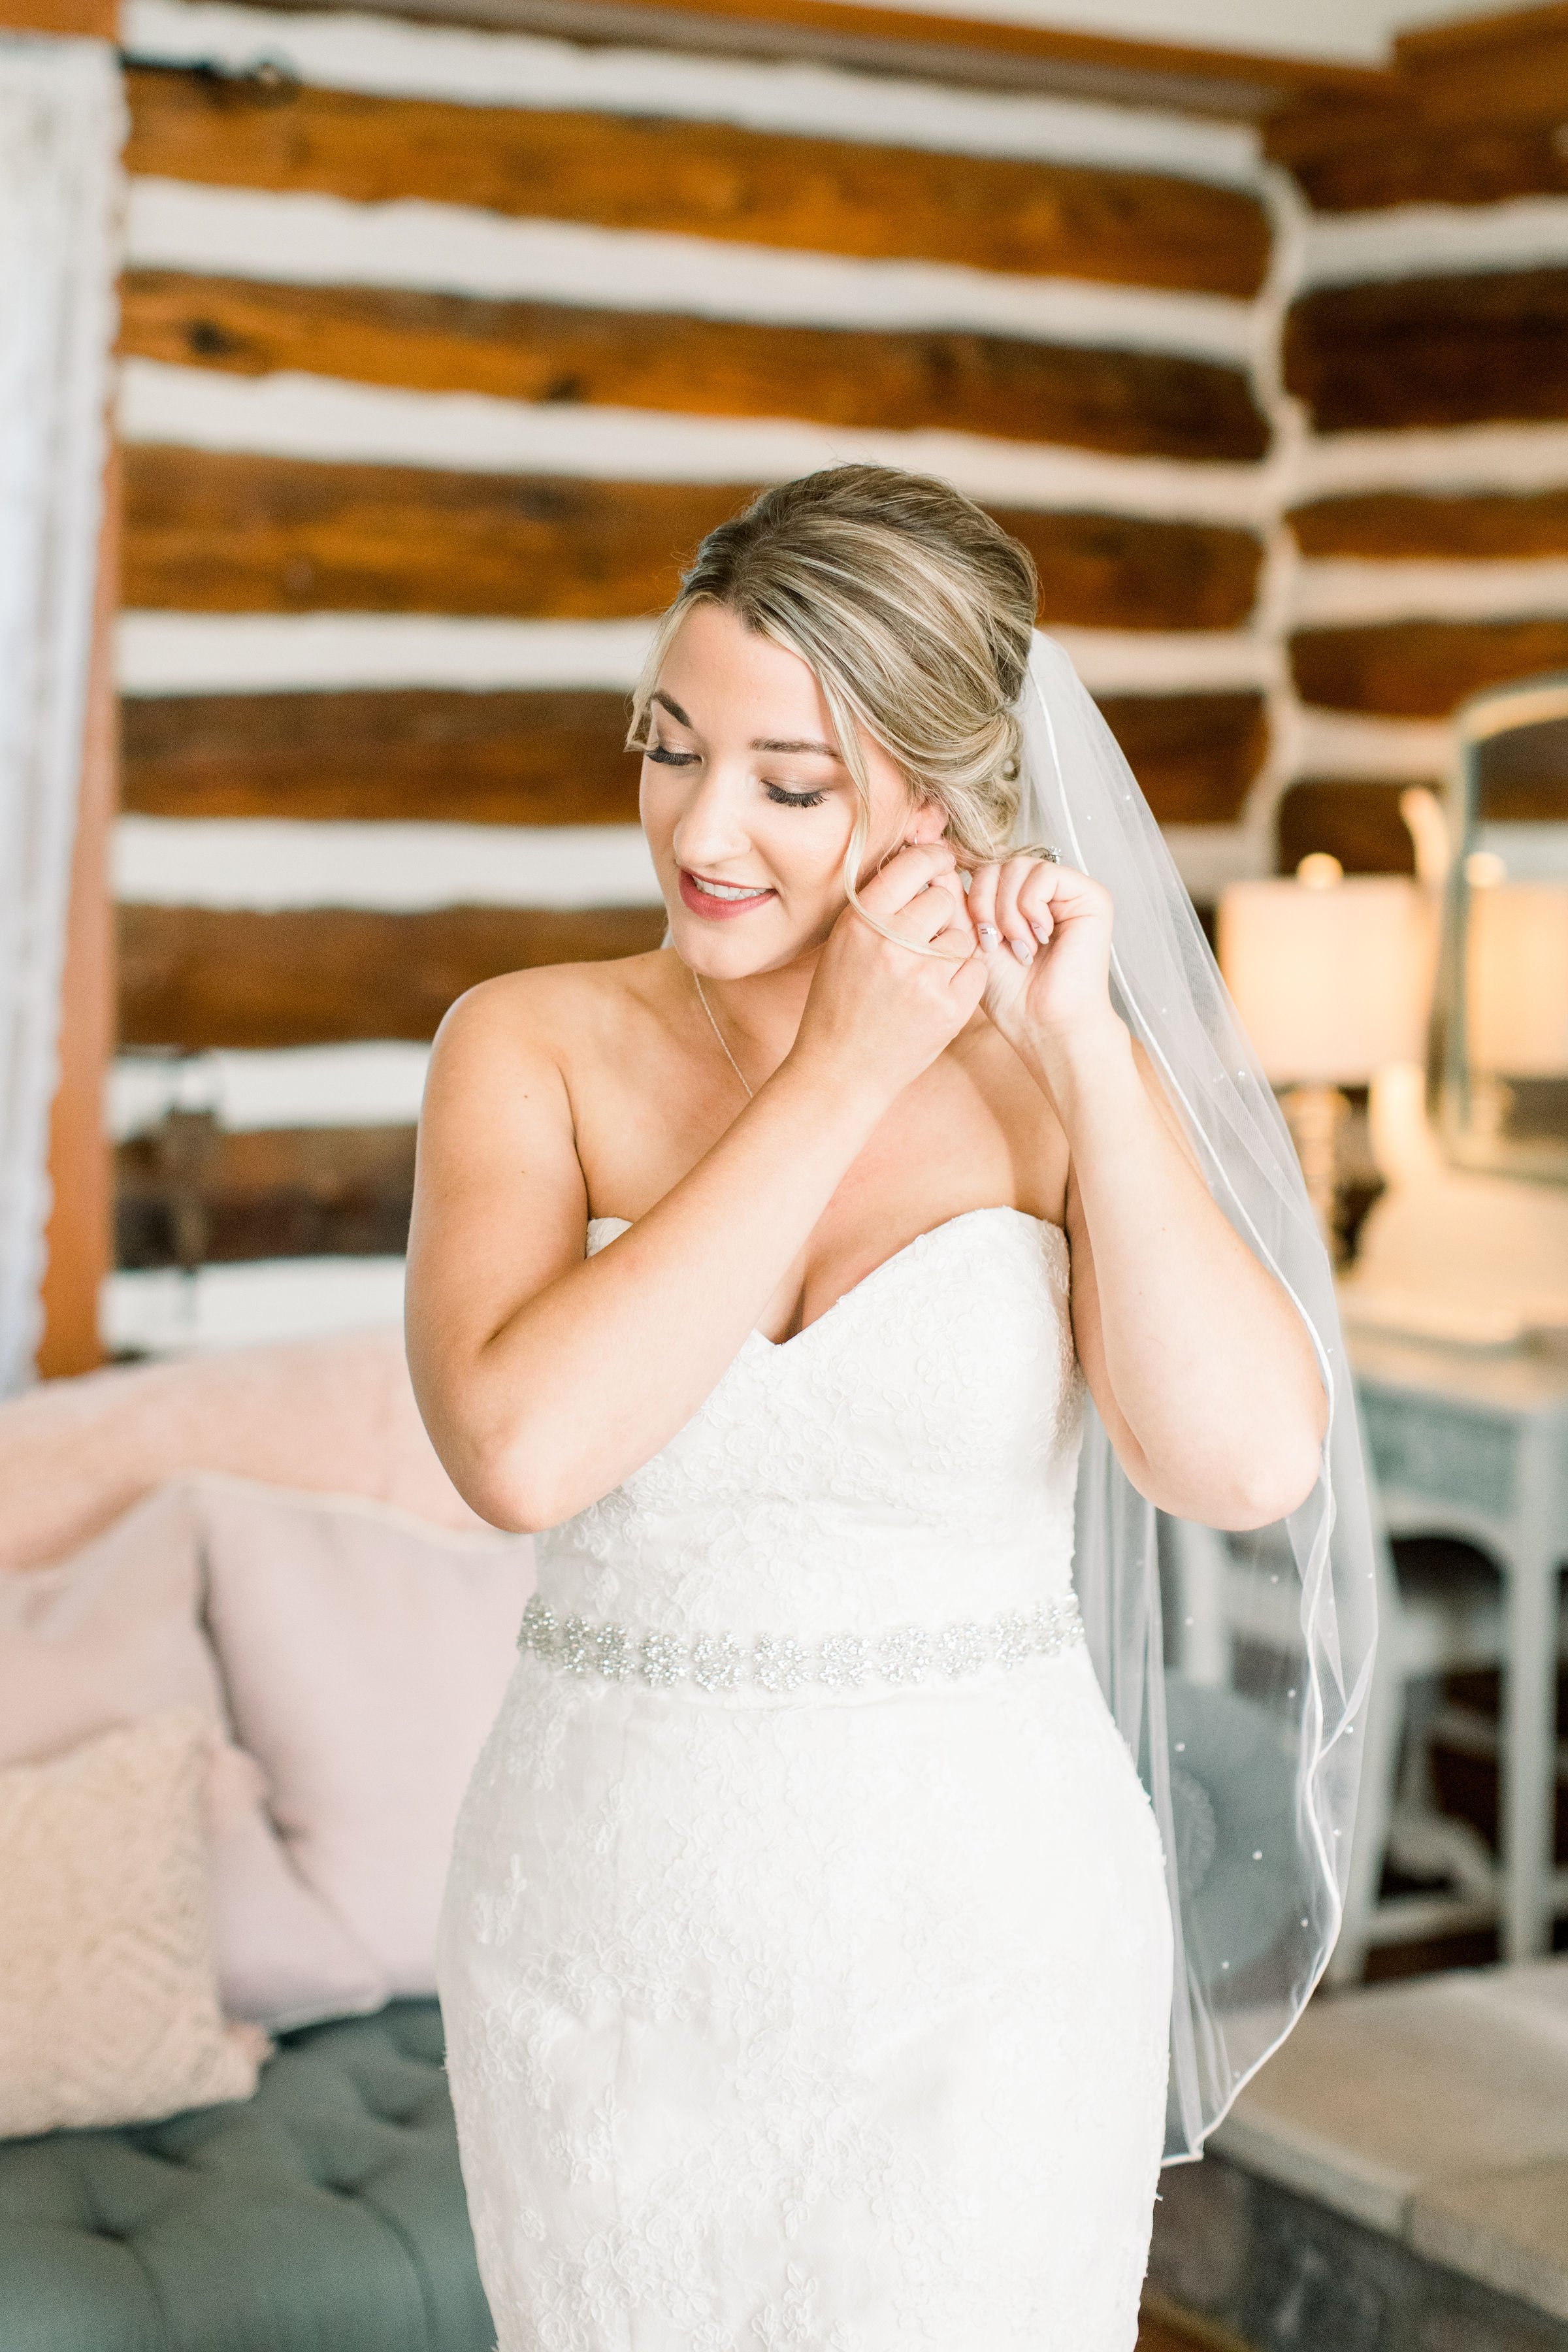  A bride wearing a strapless wedding gown puts on her earring in a cabin by Chelsea Mason Photography. form-fitting wedding dress #StonefieldEstates #Ontarioweddings #Chelseamasonphotography #Chelseamasonengagements #Ontarioweddingphotographers 